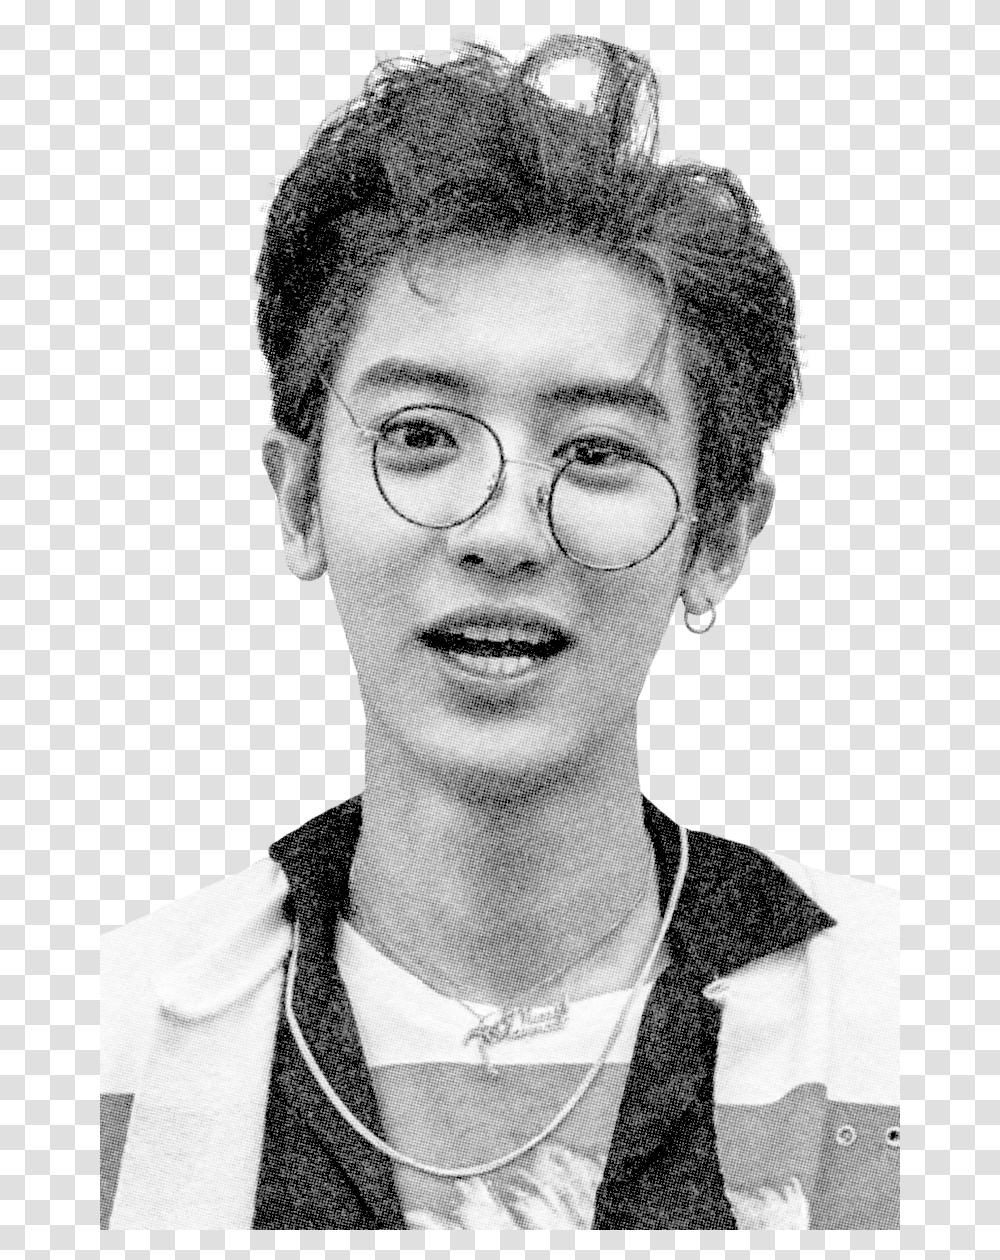 Chanyeol Exo And Kpop Image Chanyeol Black And White, Apparel, Glasses, Accessories Transparent Png